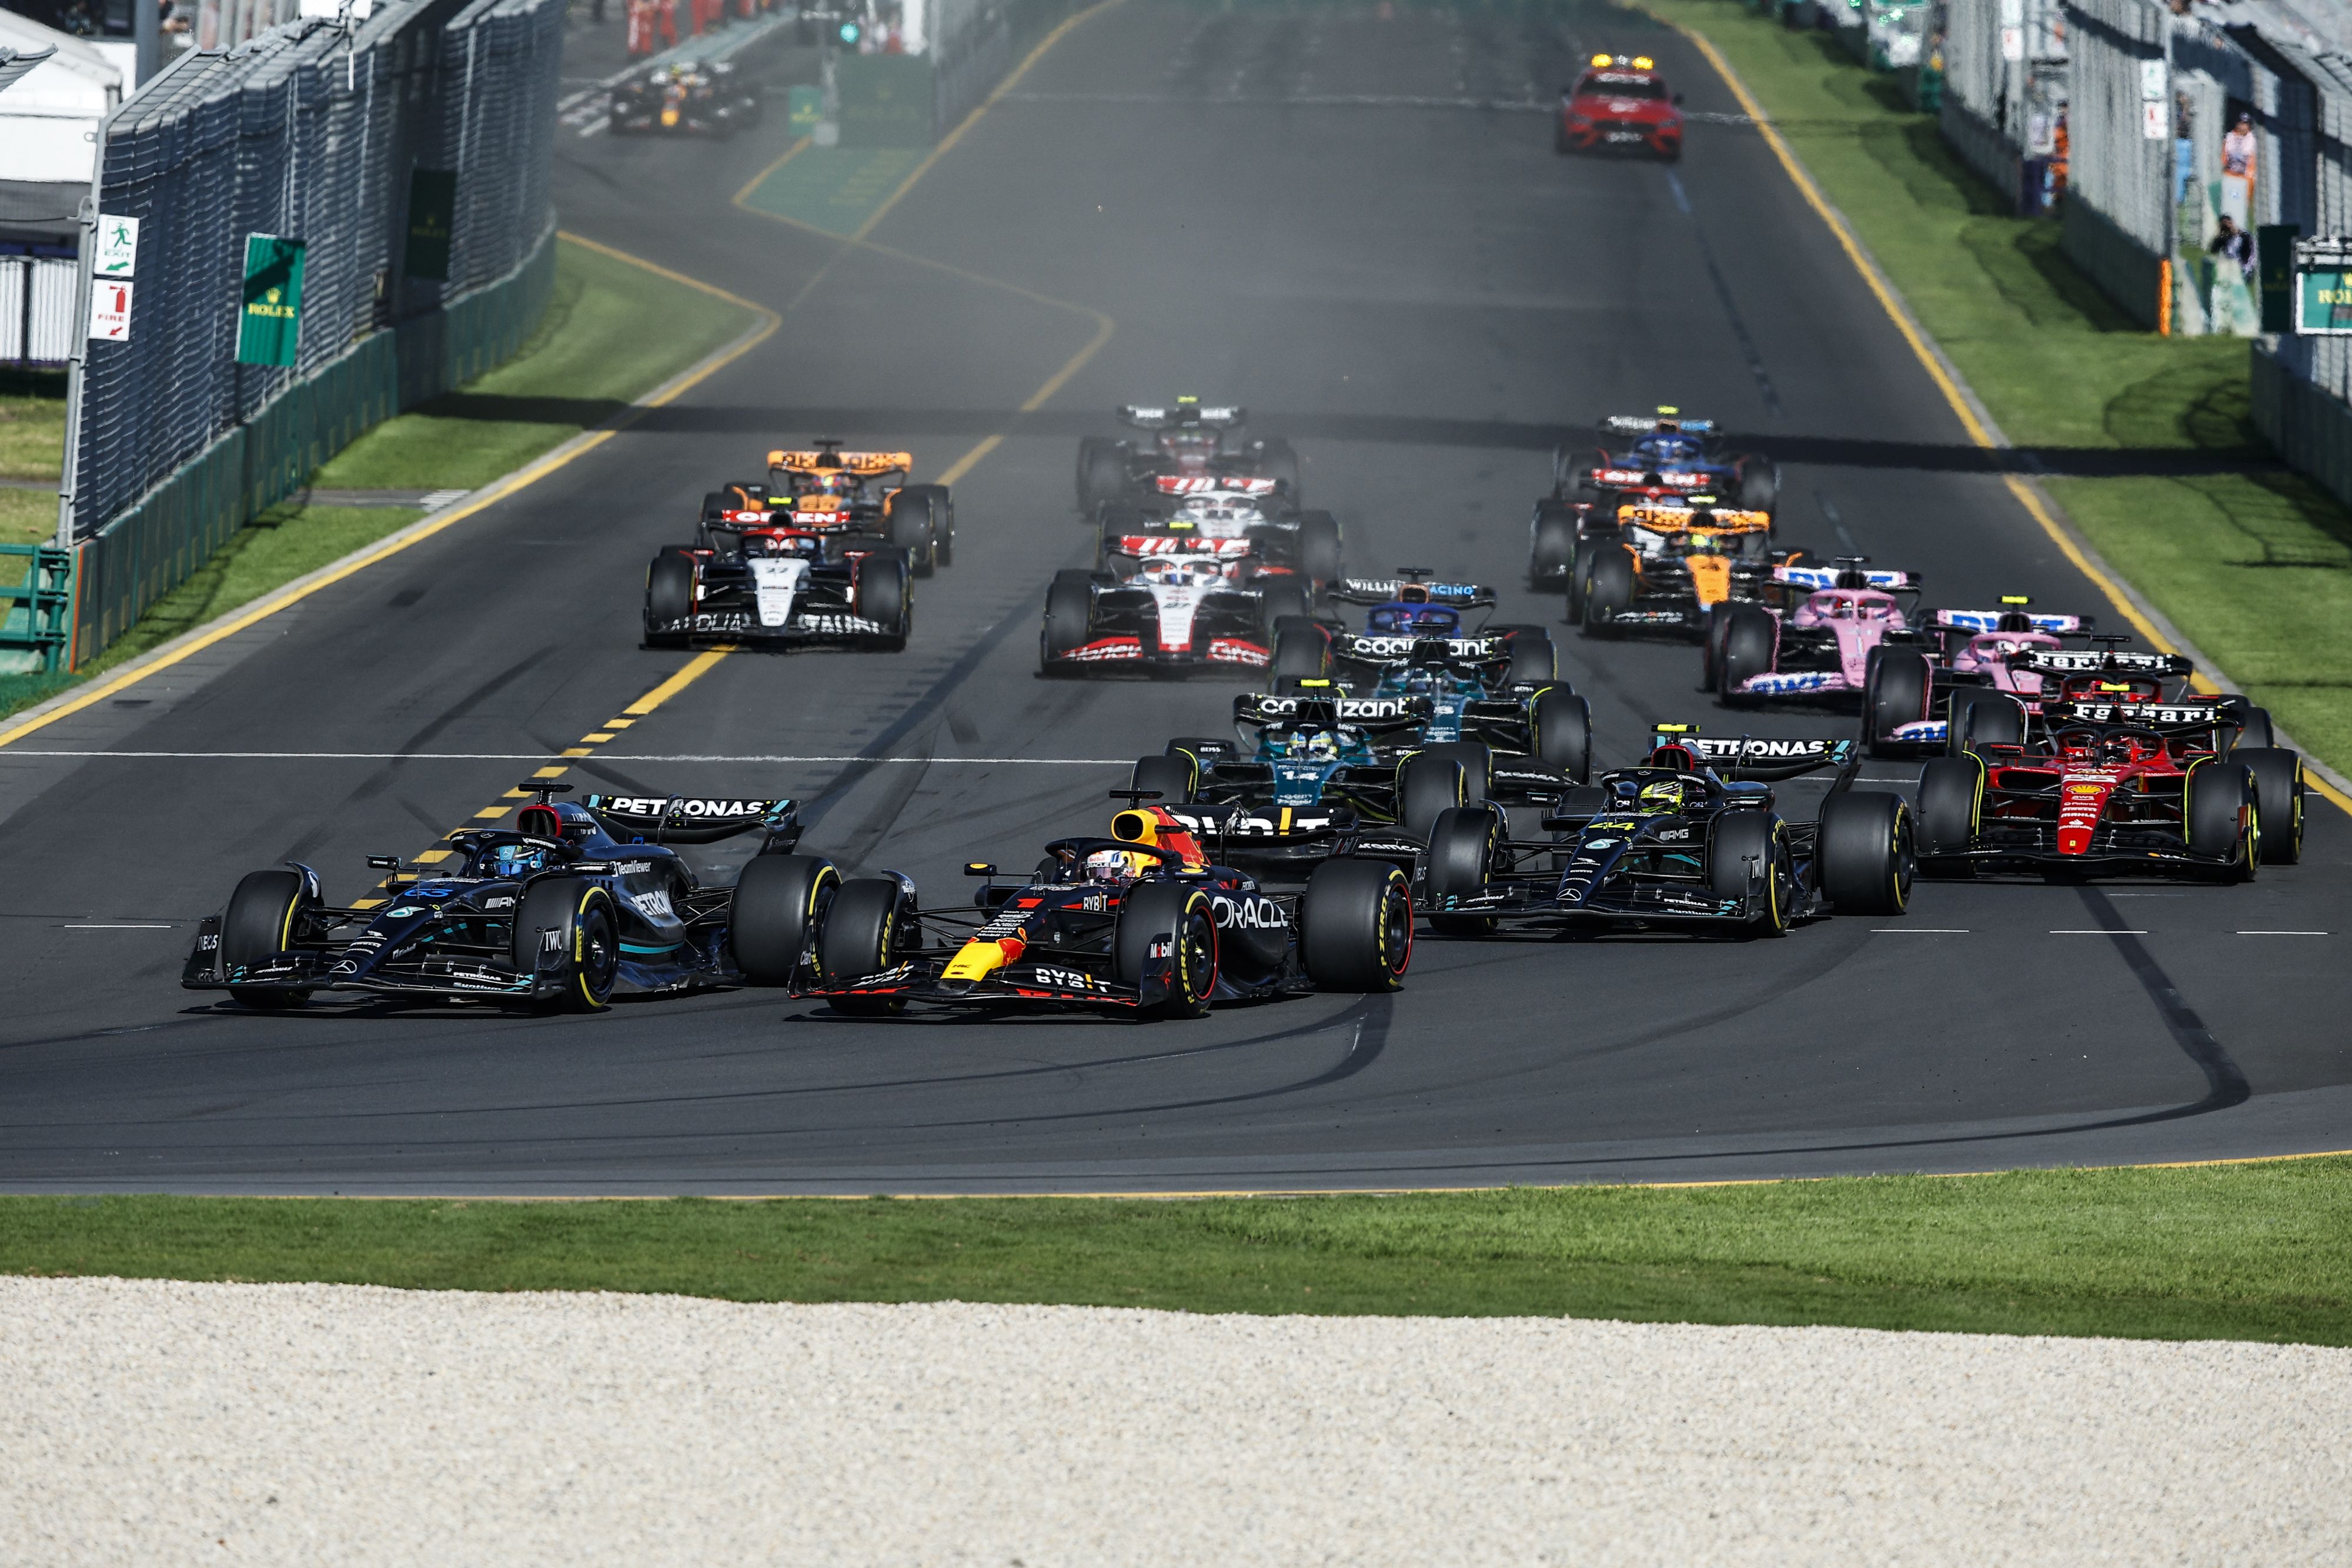 F1 Paddock Notes from Australia Formula 1 Plans Sprint Qualifying Changes and More